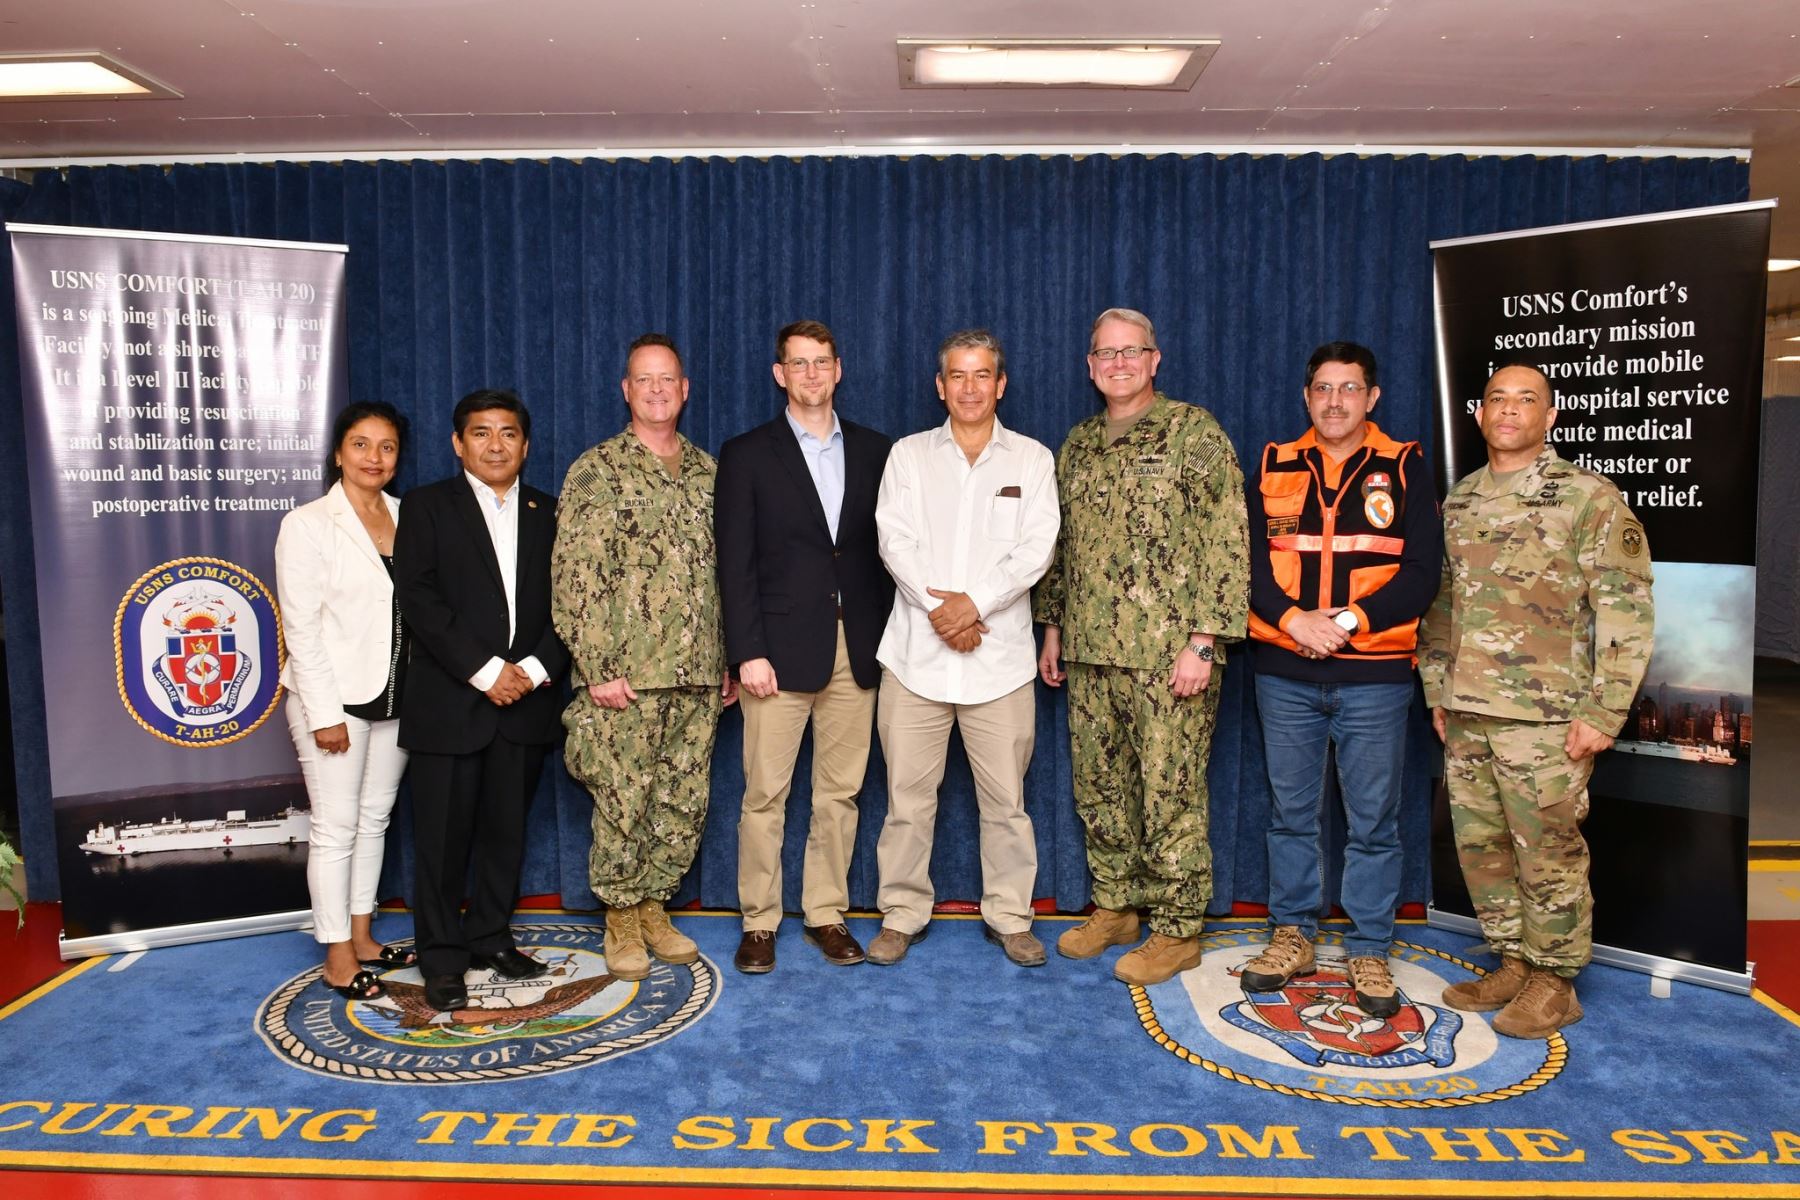 USNS Comfort carries out medical assistance mission in Peru